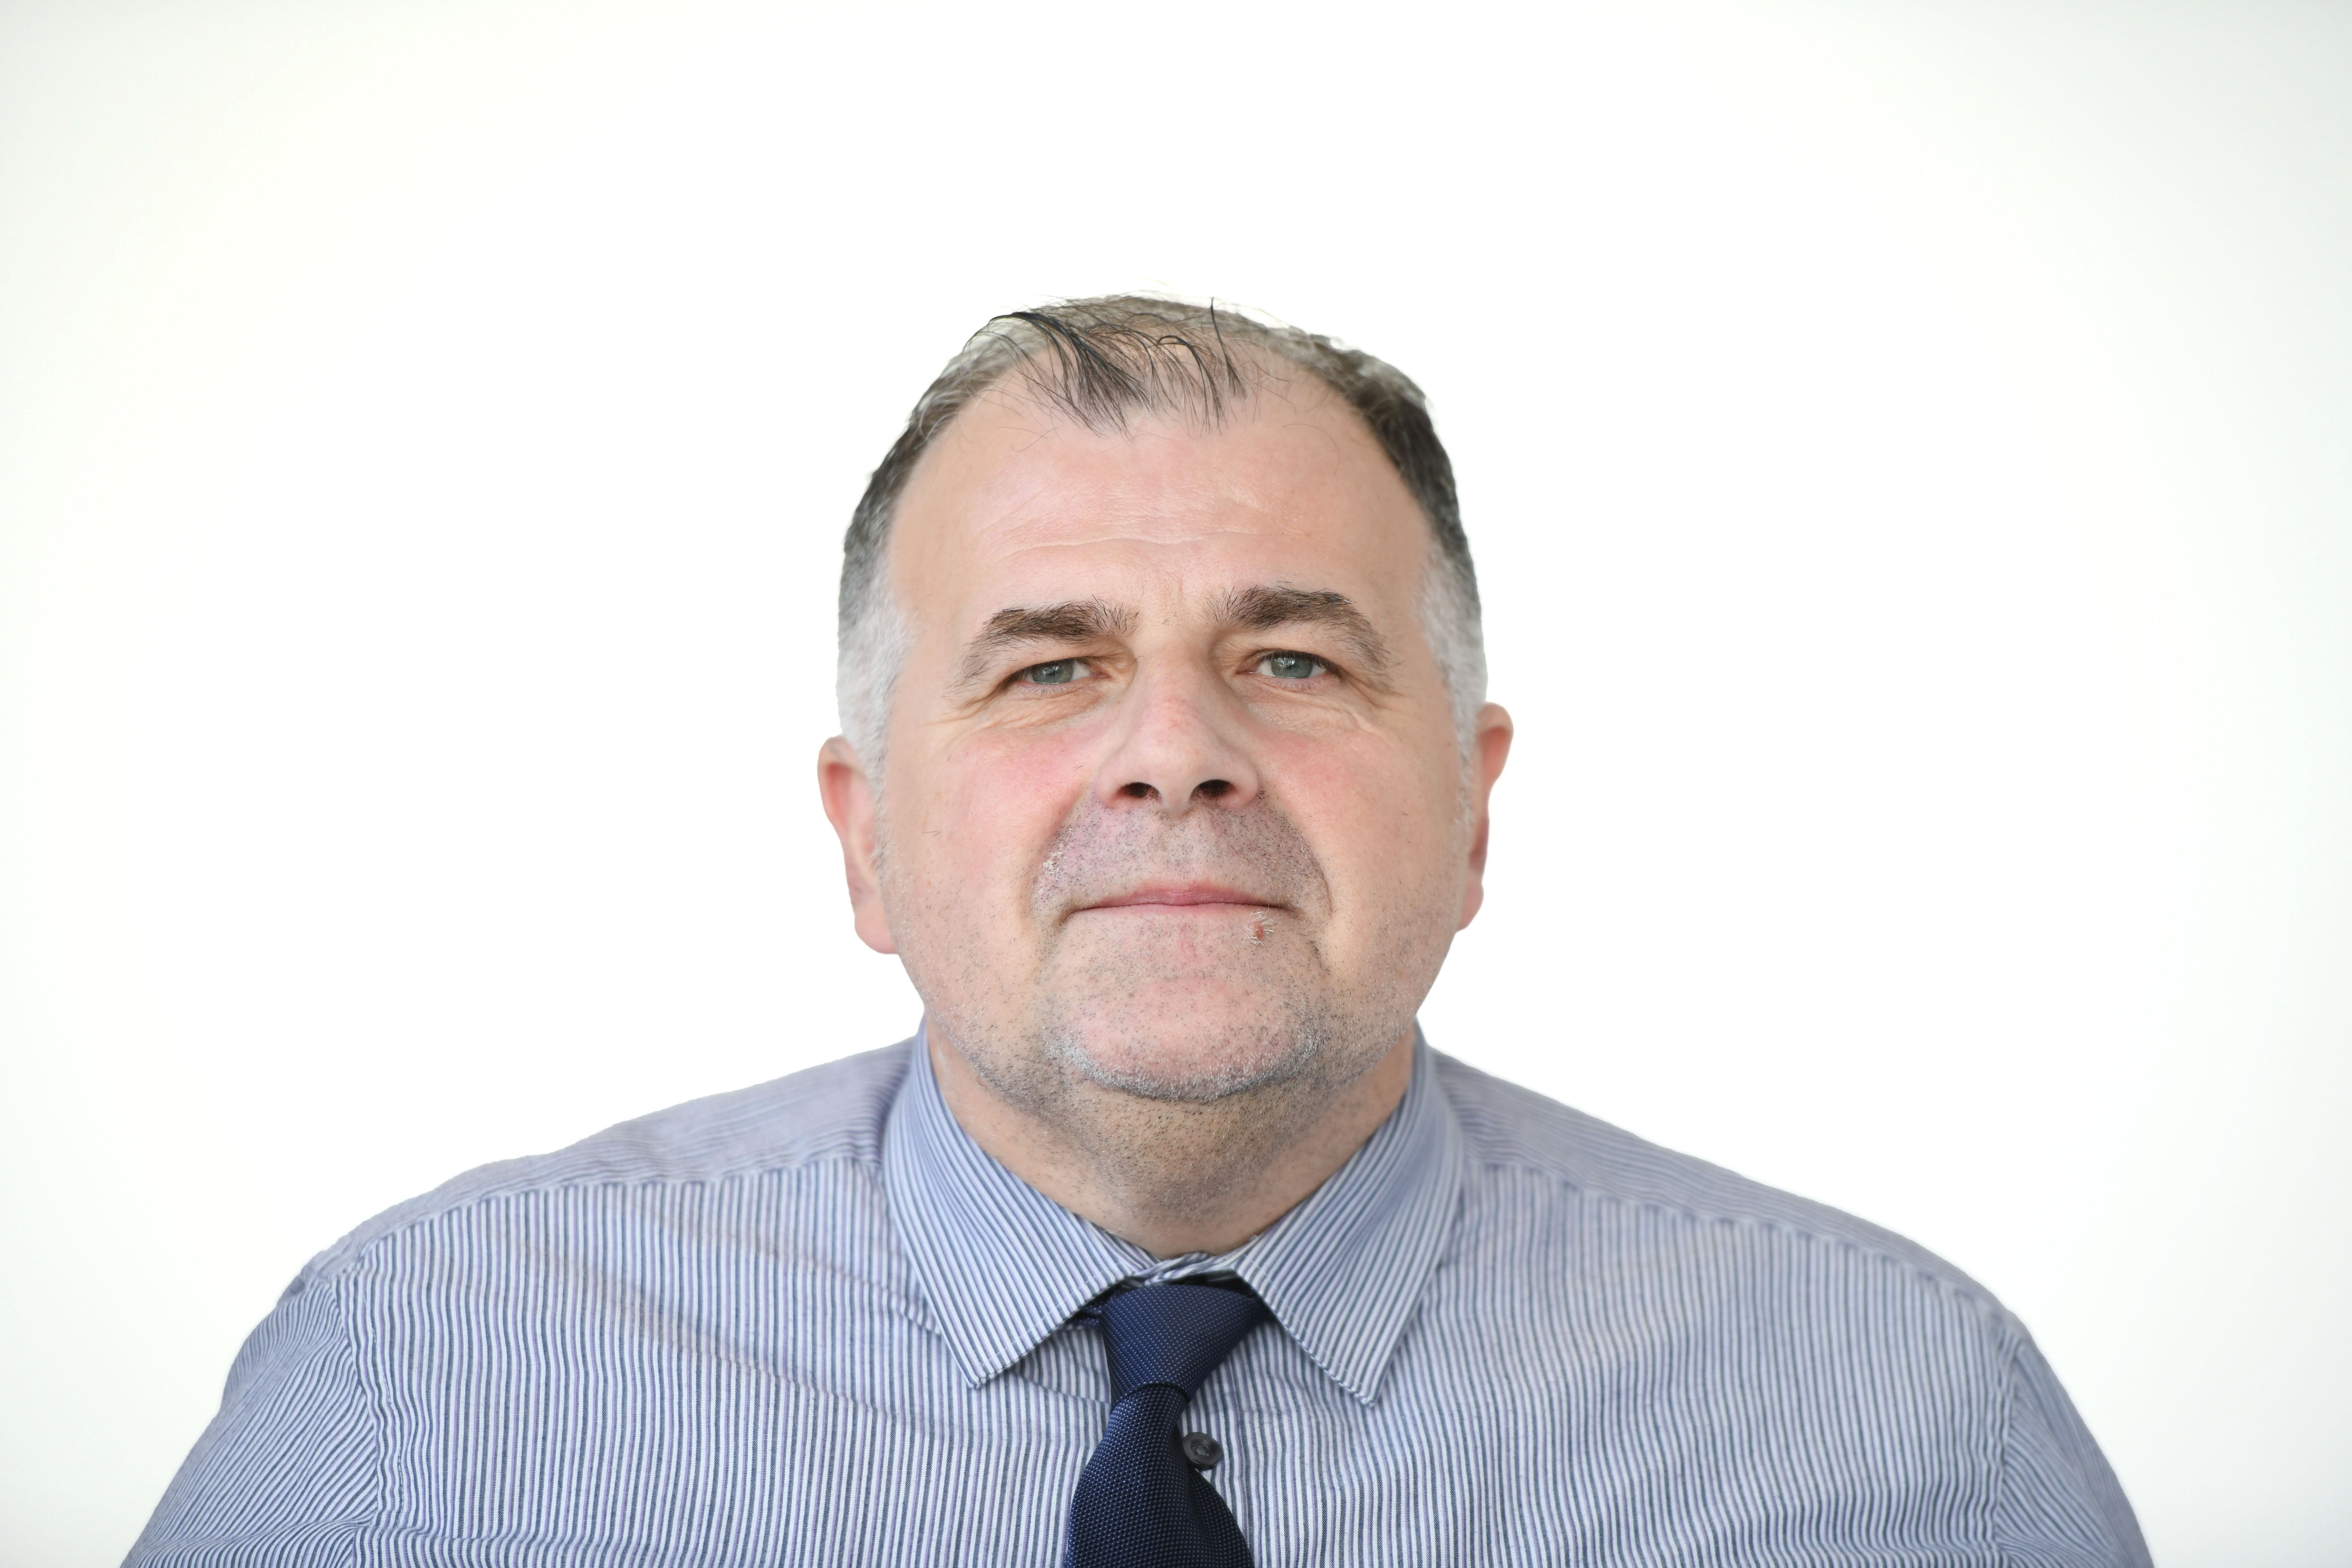 A profile picture of Athanasios Antyras, a Lecturer in Civil Engineering and Environmental Management at GCU.